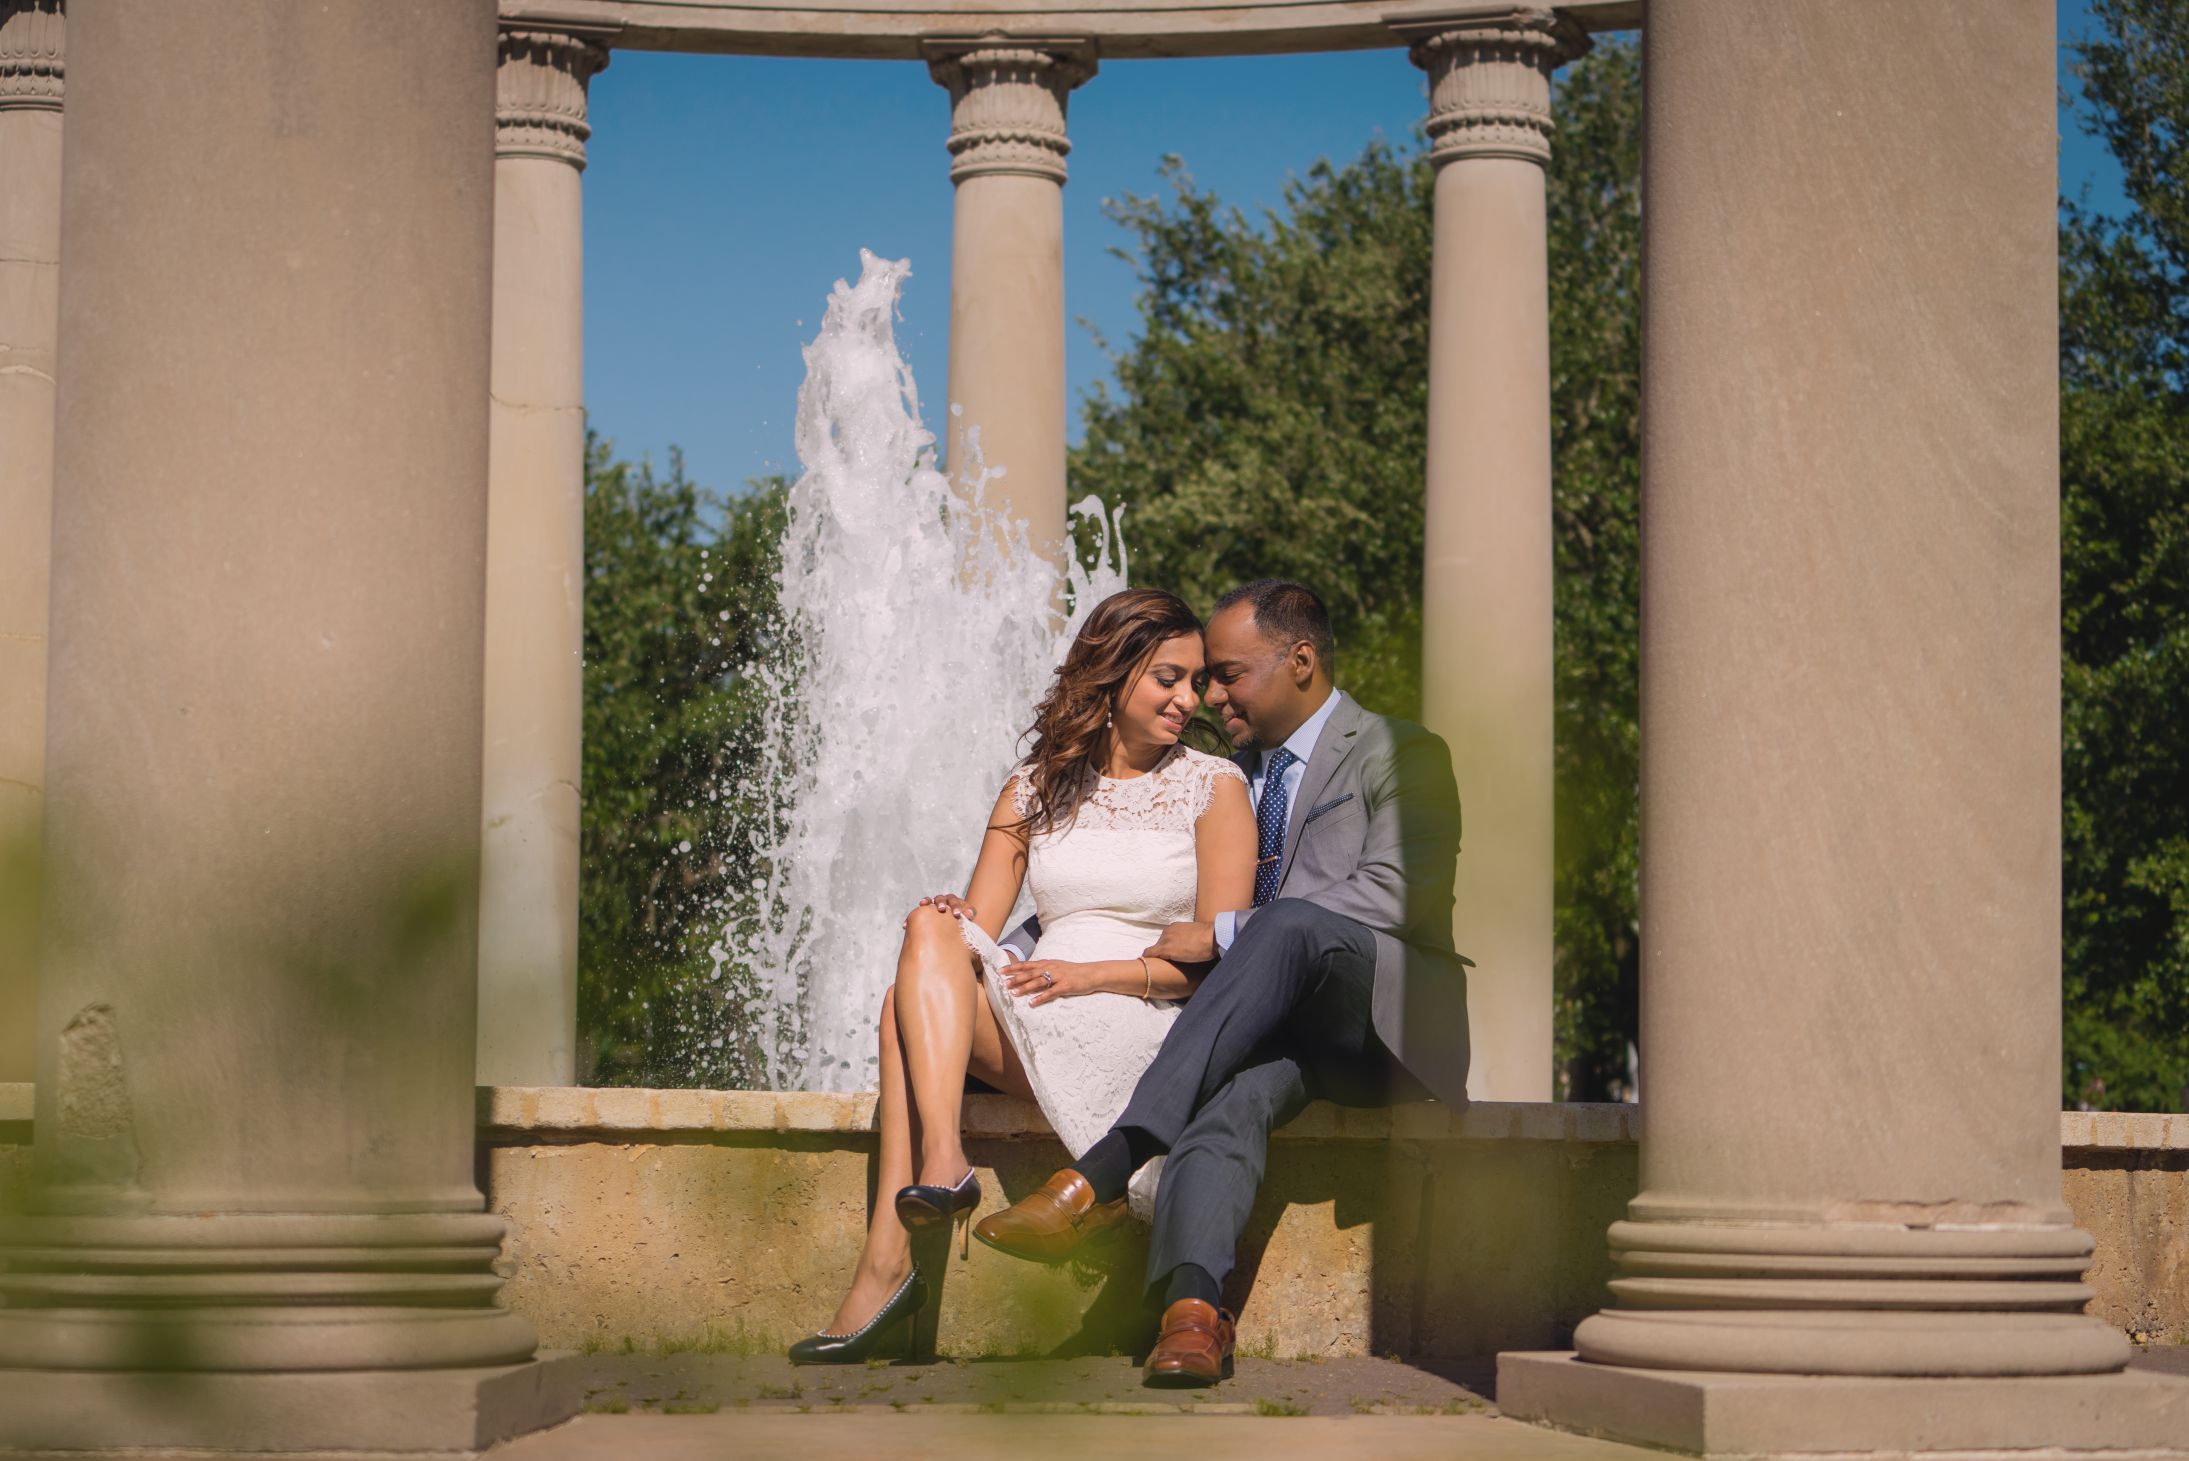 Couple photoshoot outdoor with water fountain in the back